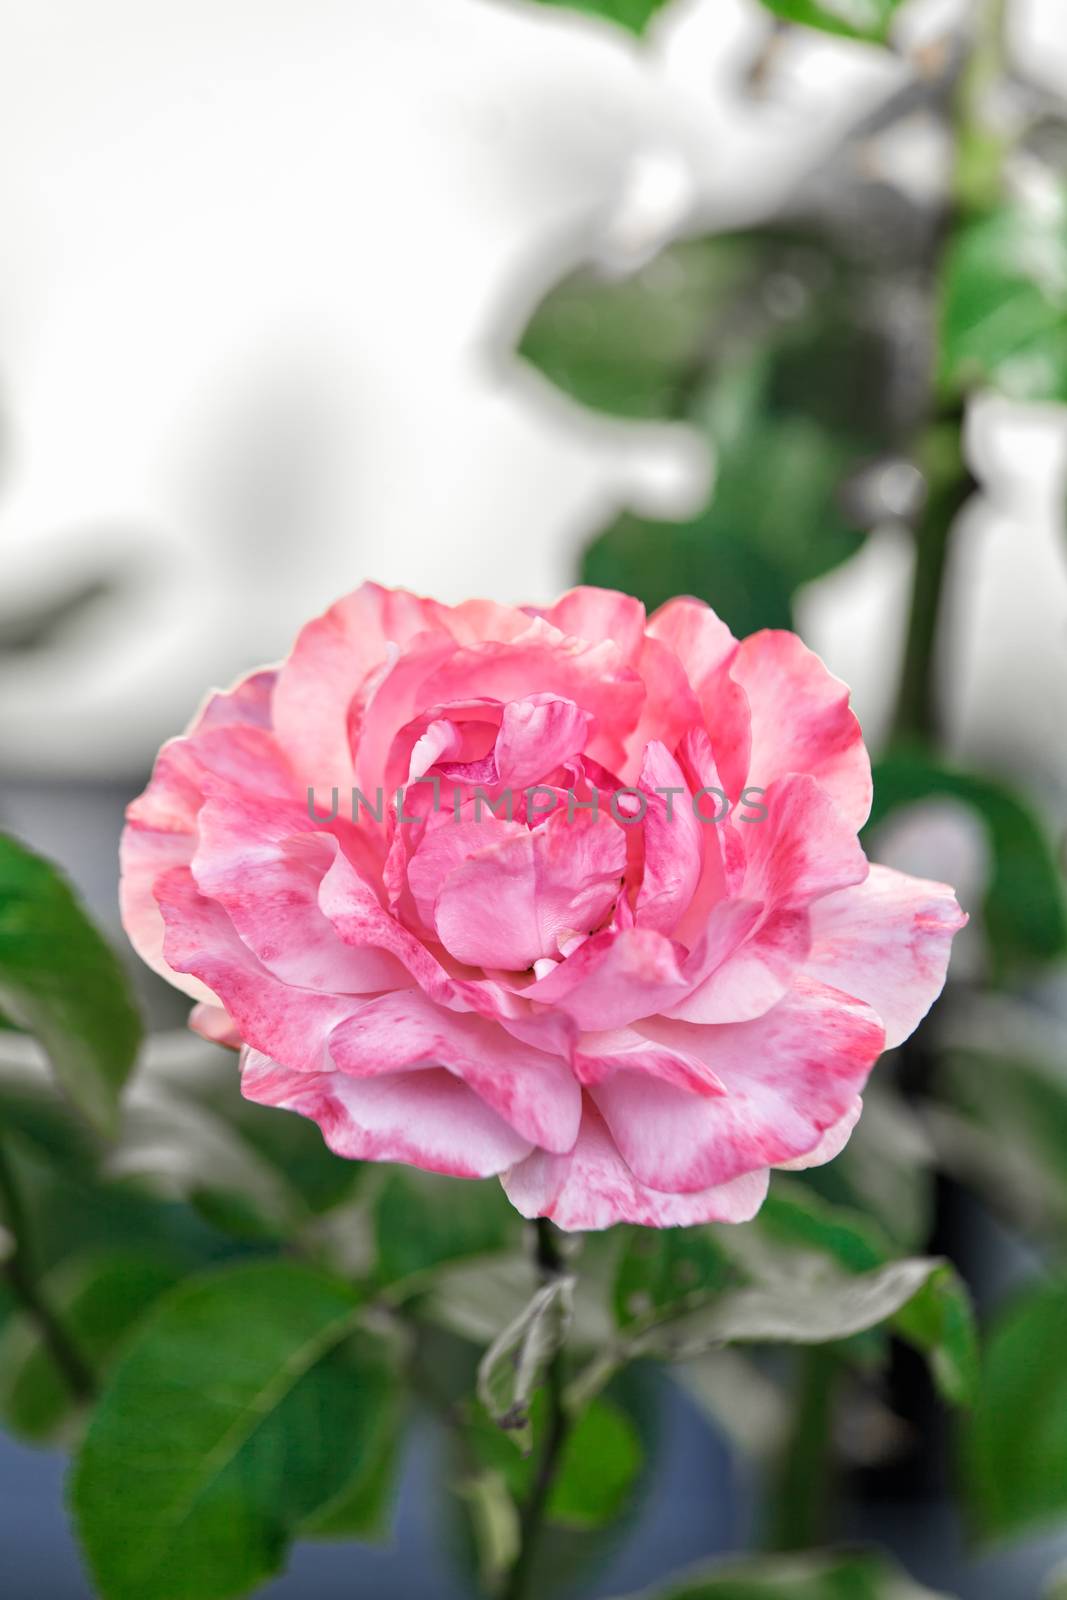 Single pretty perfect pink rose growing on a bush in the garden symbolic of love and romance, with copyspace